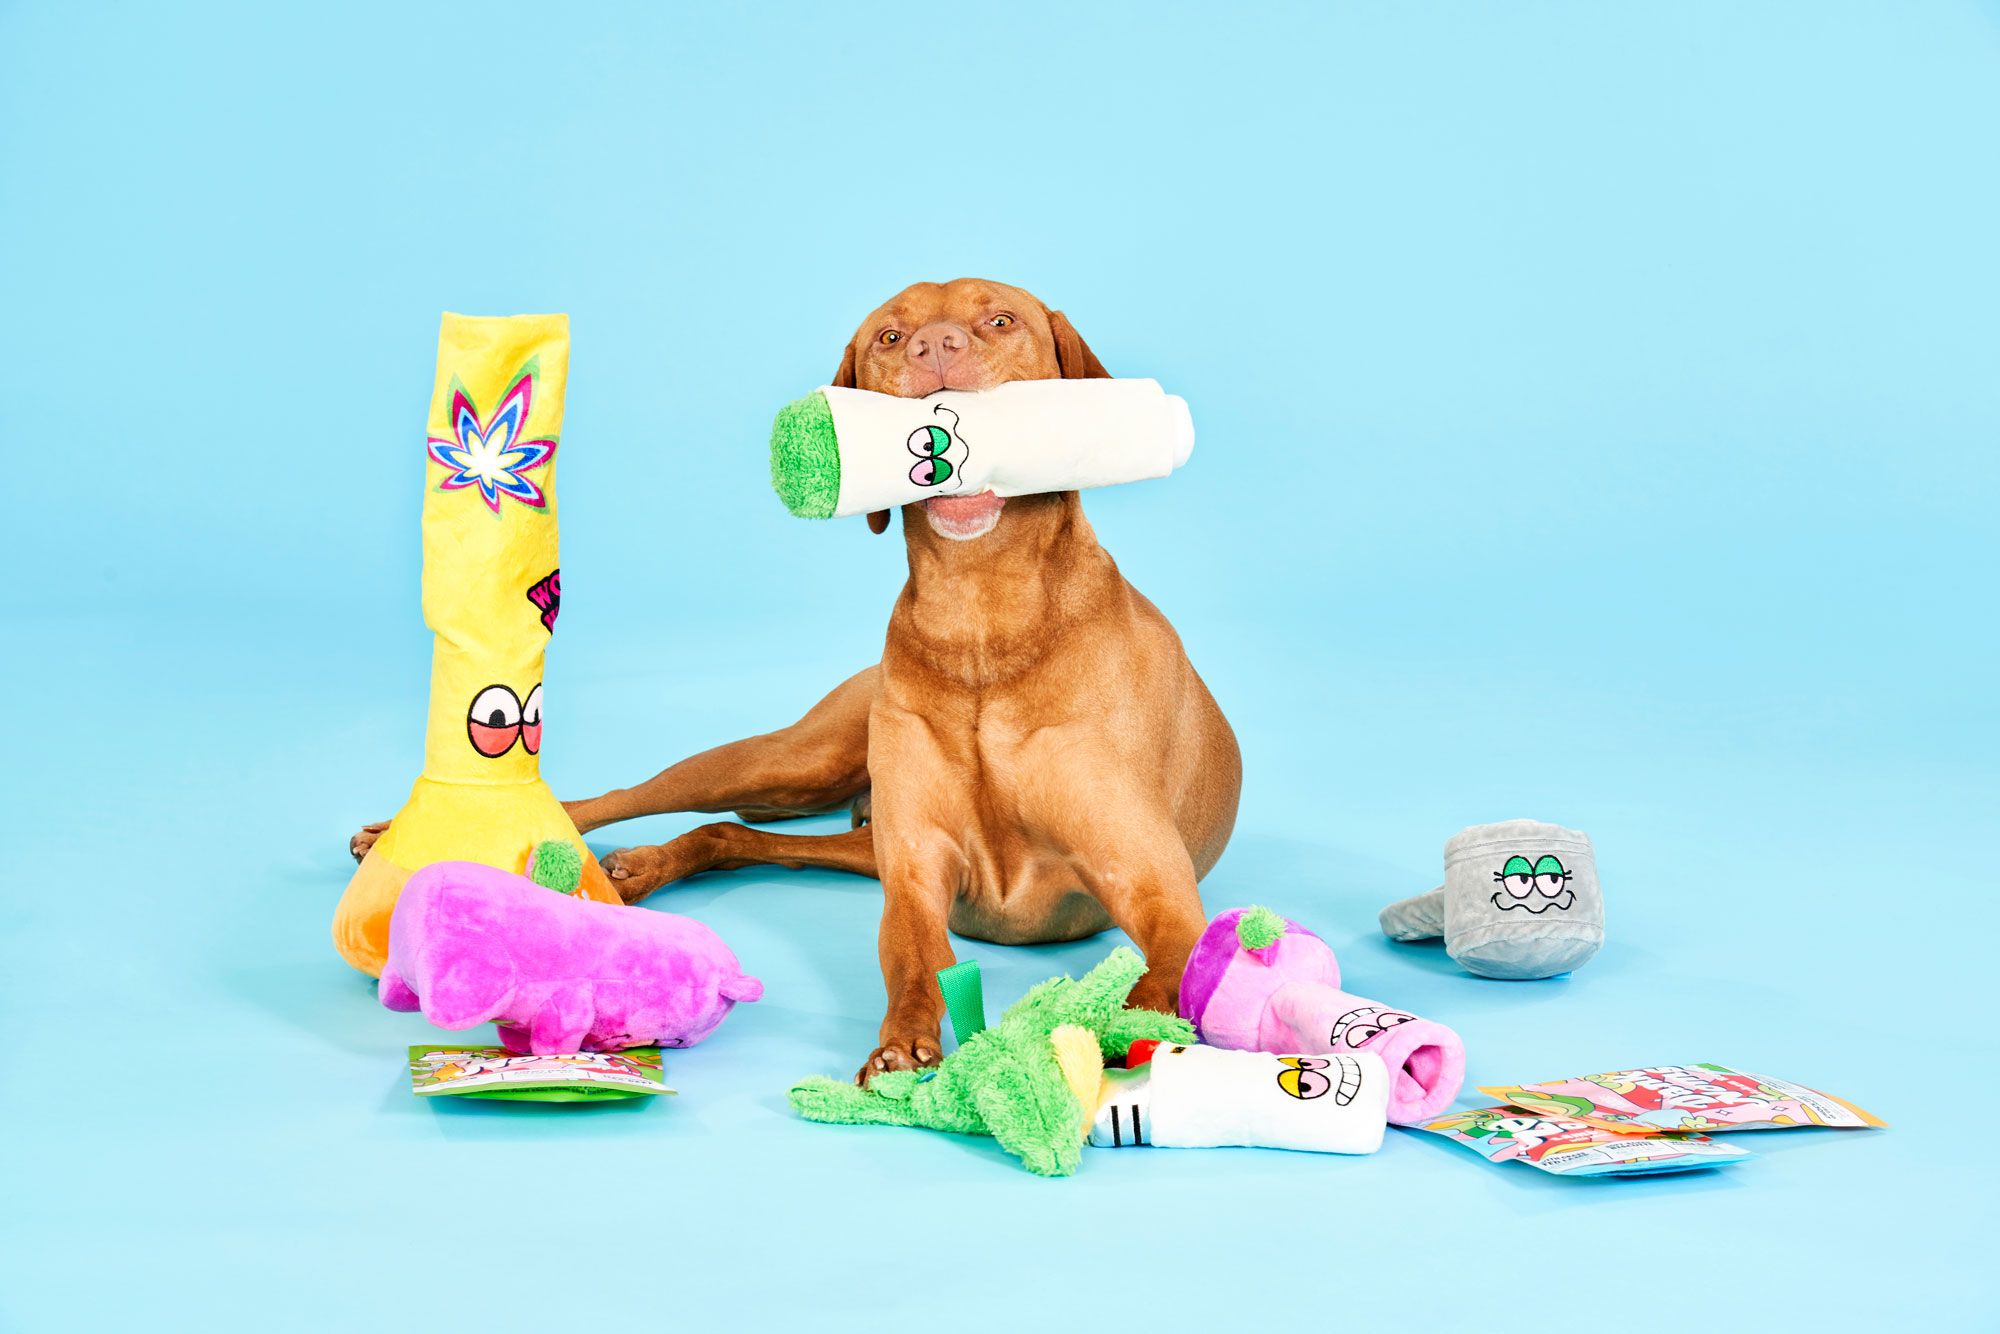 Dropship Bud Jr. The Weed Nug 420 Dog Toy to Sell Online at a